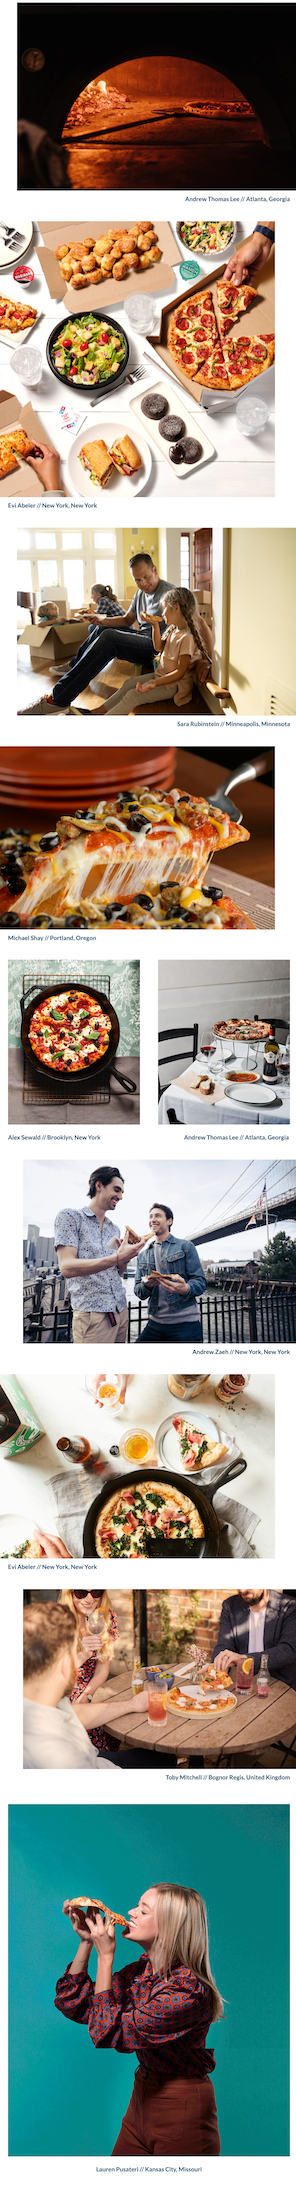 Creative in Place: Pizza, Pizza! emailer 